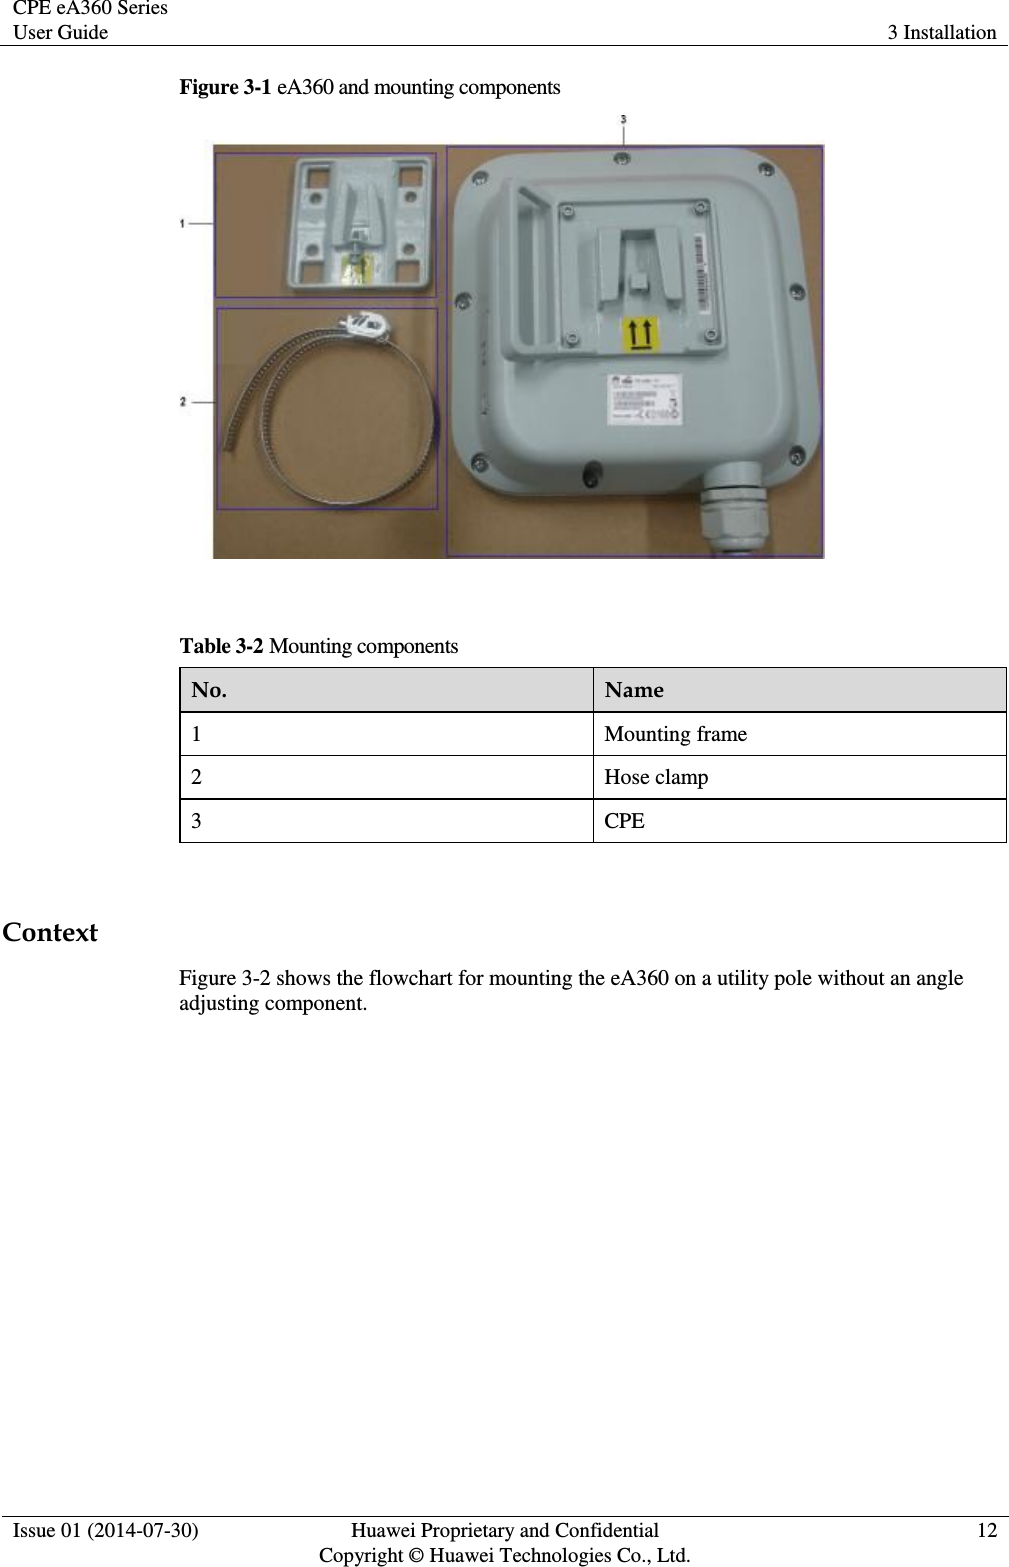 CPE eA360 Series User Guide 3 Installation  Issue 01 (2014-07-30) Huawei Proprietary and Confidential                                     Copyright © Huawei Technologies Co., Ltd. 12  Figure 3-1 eA360 and mounting components   Table 3-2 Mounting components No. Name 1 Mounting frame 2 Hose clamp 3 CPE  Context Figure 3-2 shows the flowchart for mounting the eA360 on a utility pole without an angle adjusting component. 